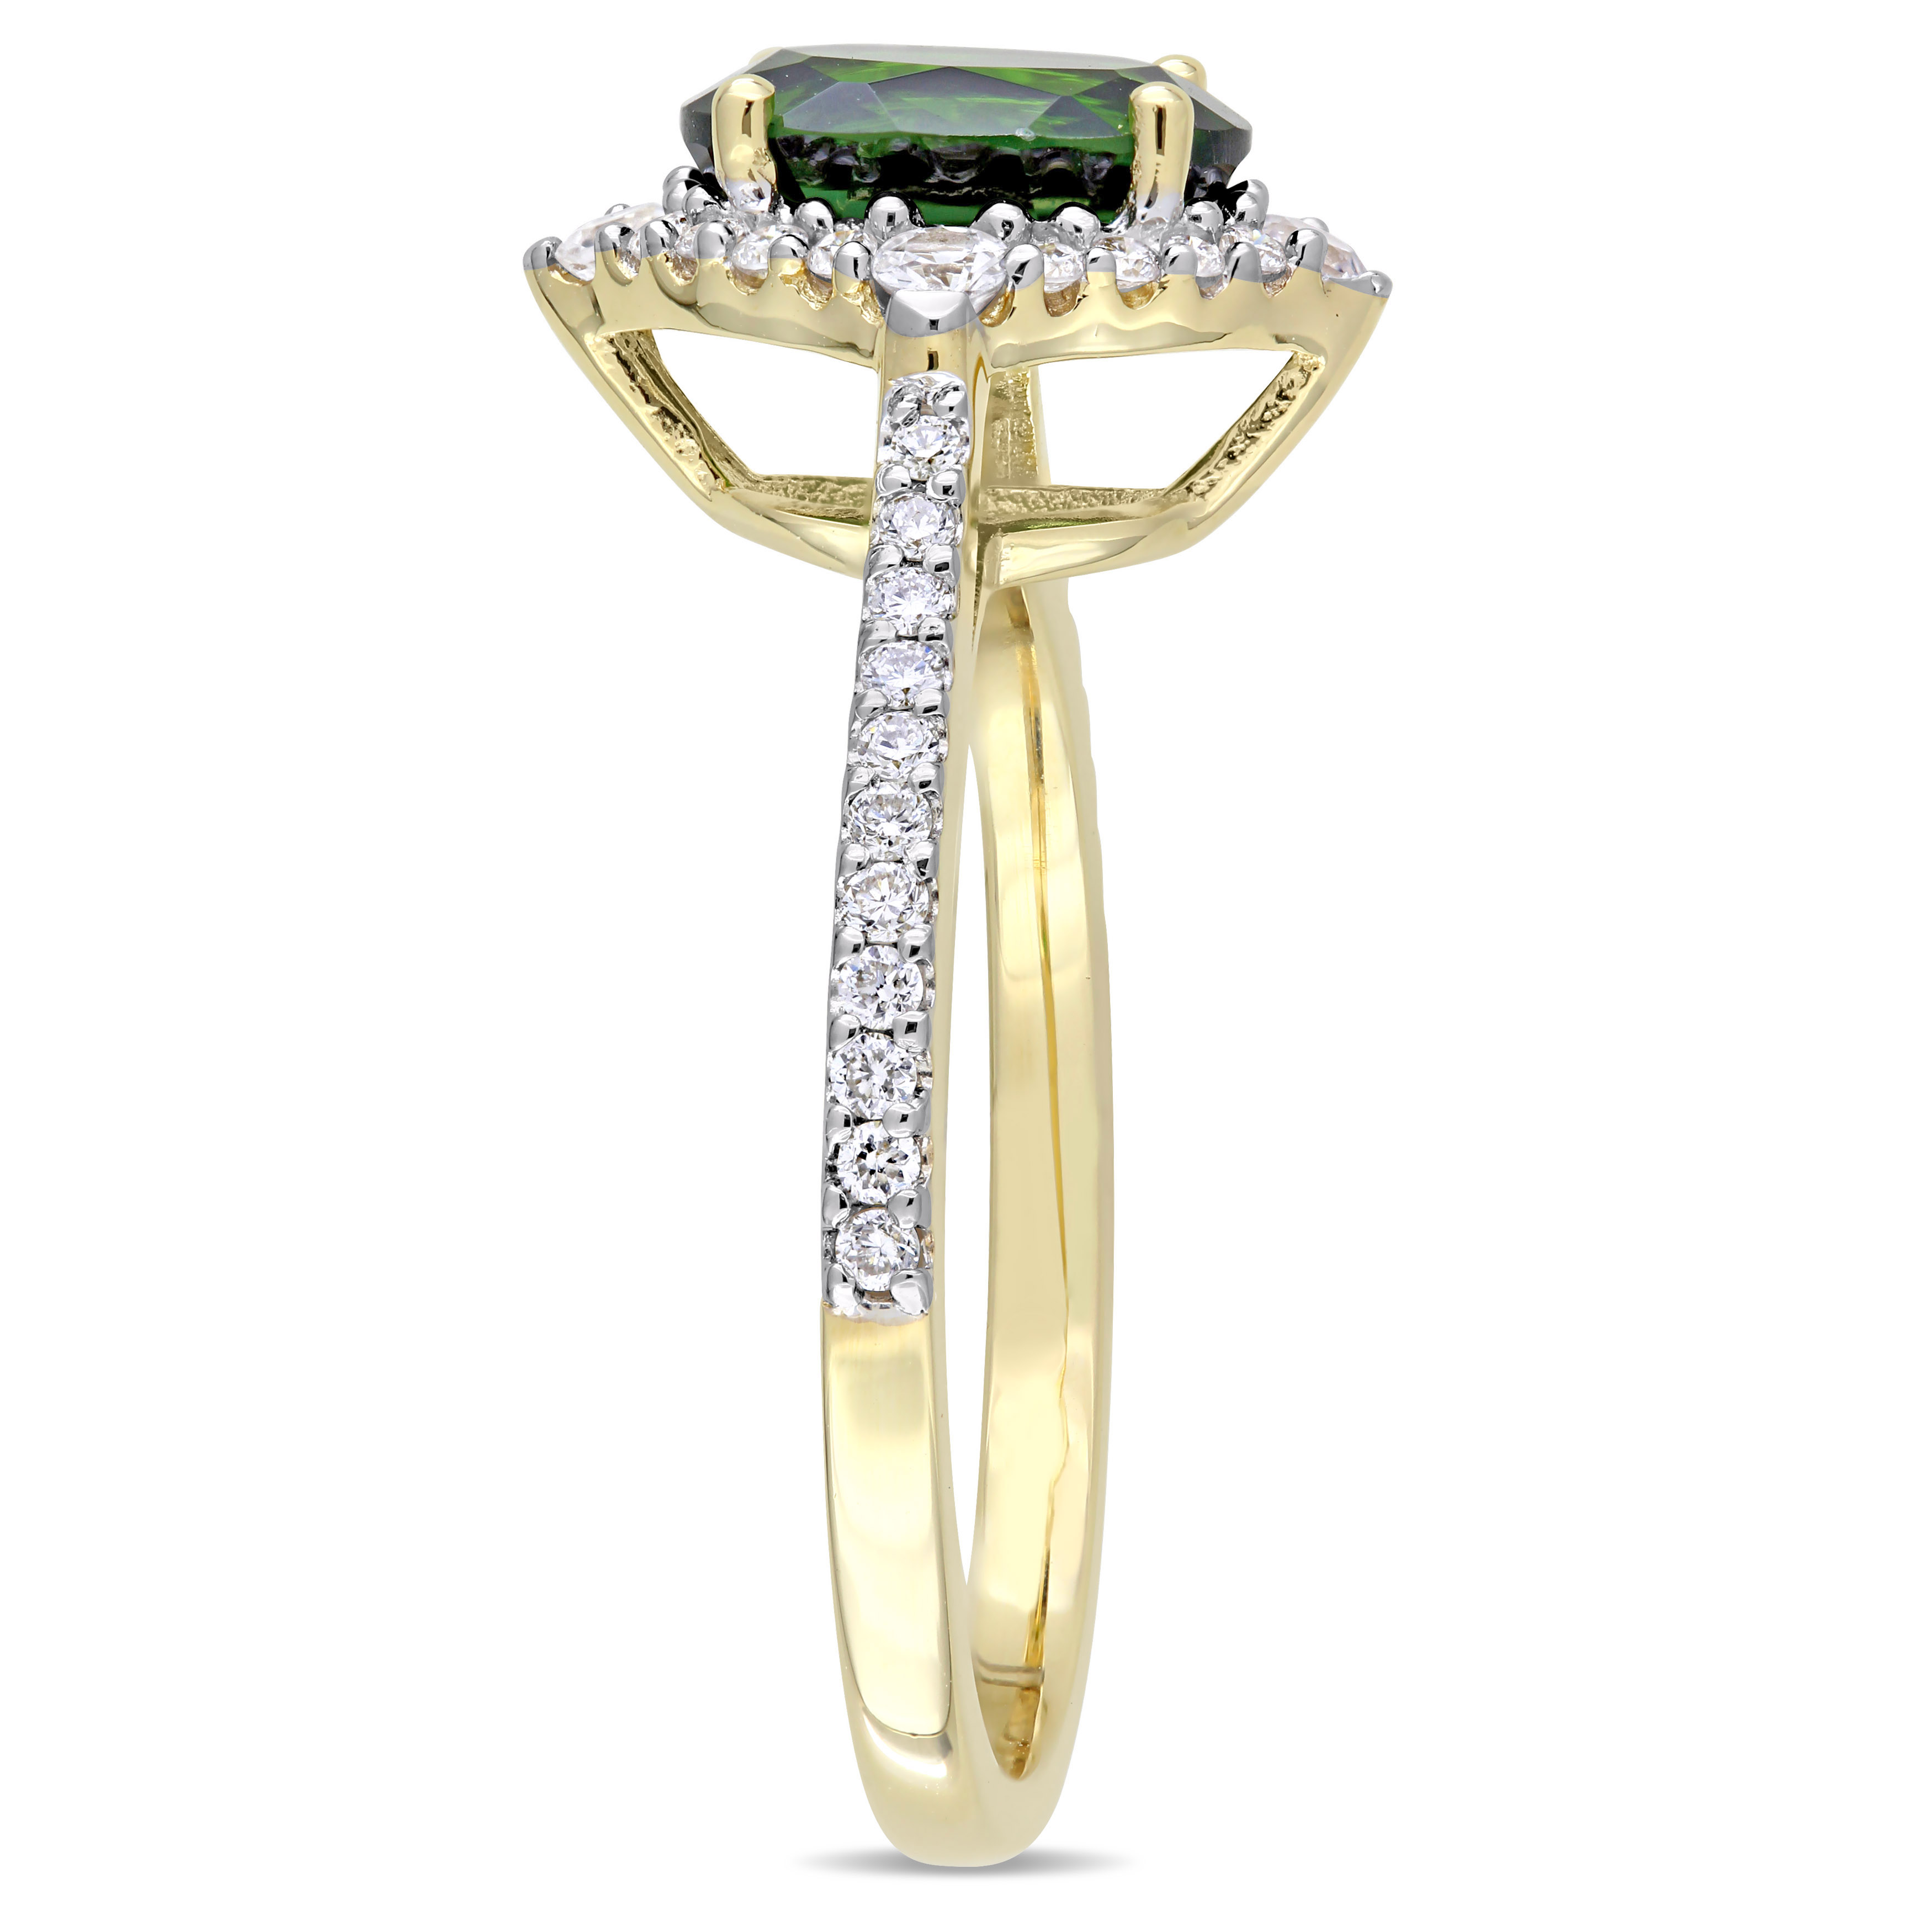 Chrome Diopside, White Sapphire and 1/4 CT TW Diamond Vintage Ring in 14k Yellow Gold